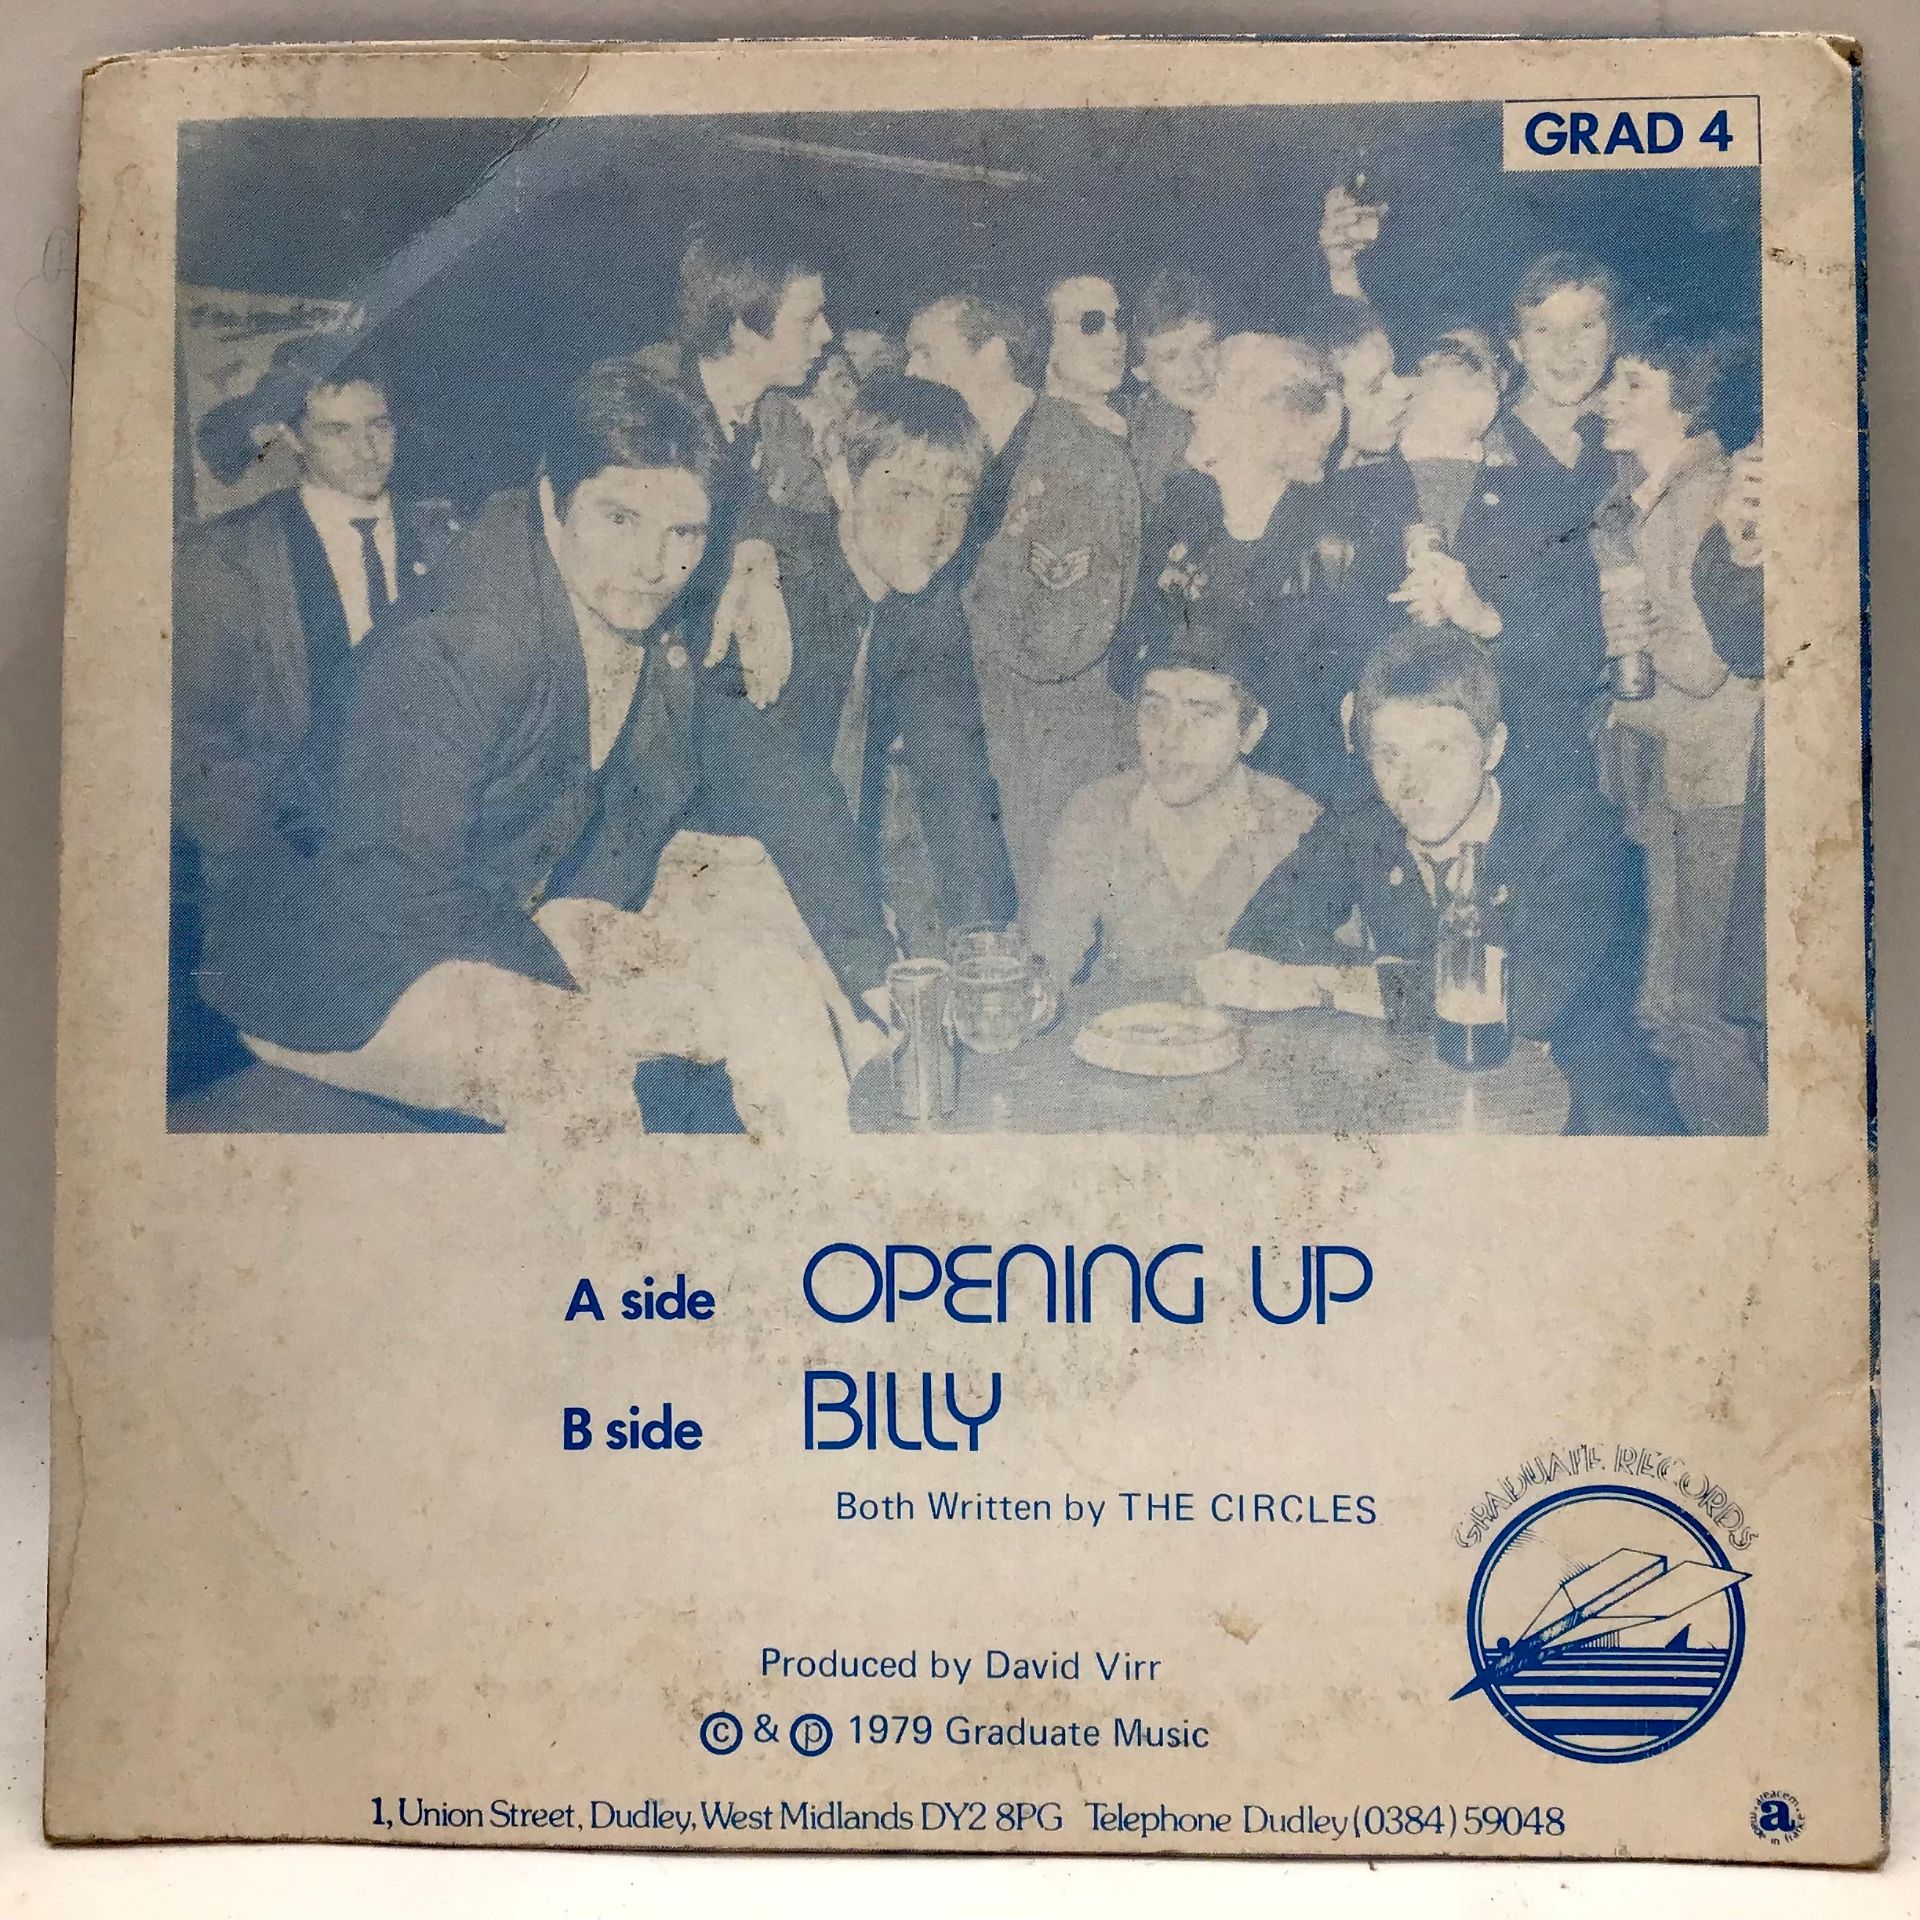 THE CIRCLES ‘OPENING UP’ RARE 7” SINGLE. Original UK 45 issued in 1979 by Graduate Records GARD 4. - Image 2 of 2